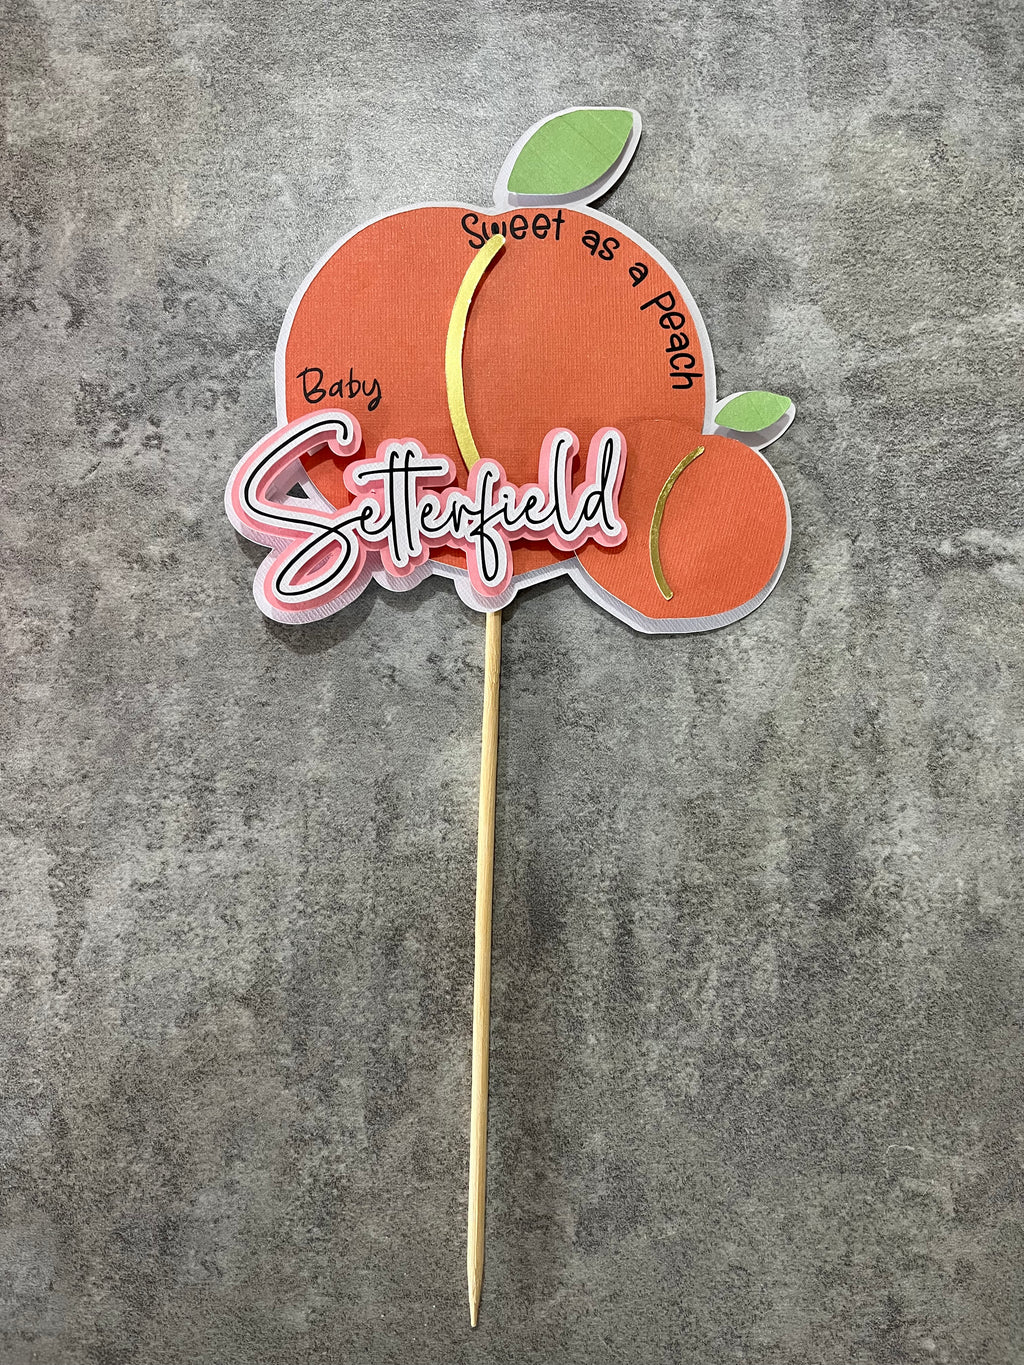 Sweet as a Peach : Baby Shower Cake Topper